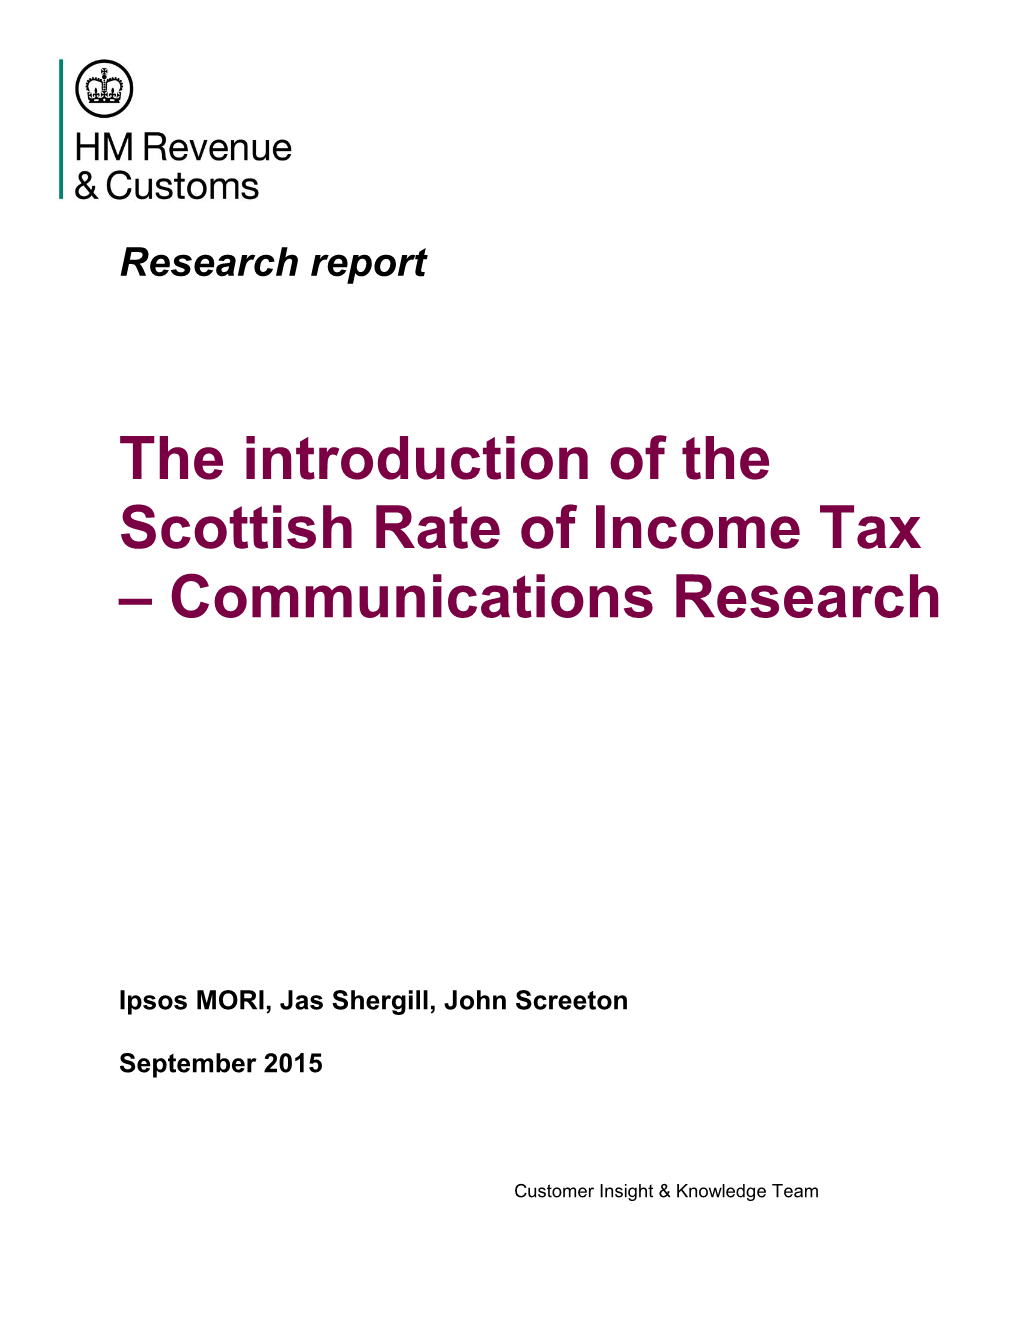 The Introduction of the Scottish Rate of Income Tax – Communications Research